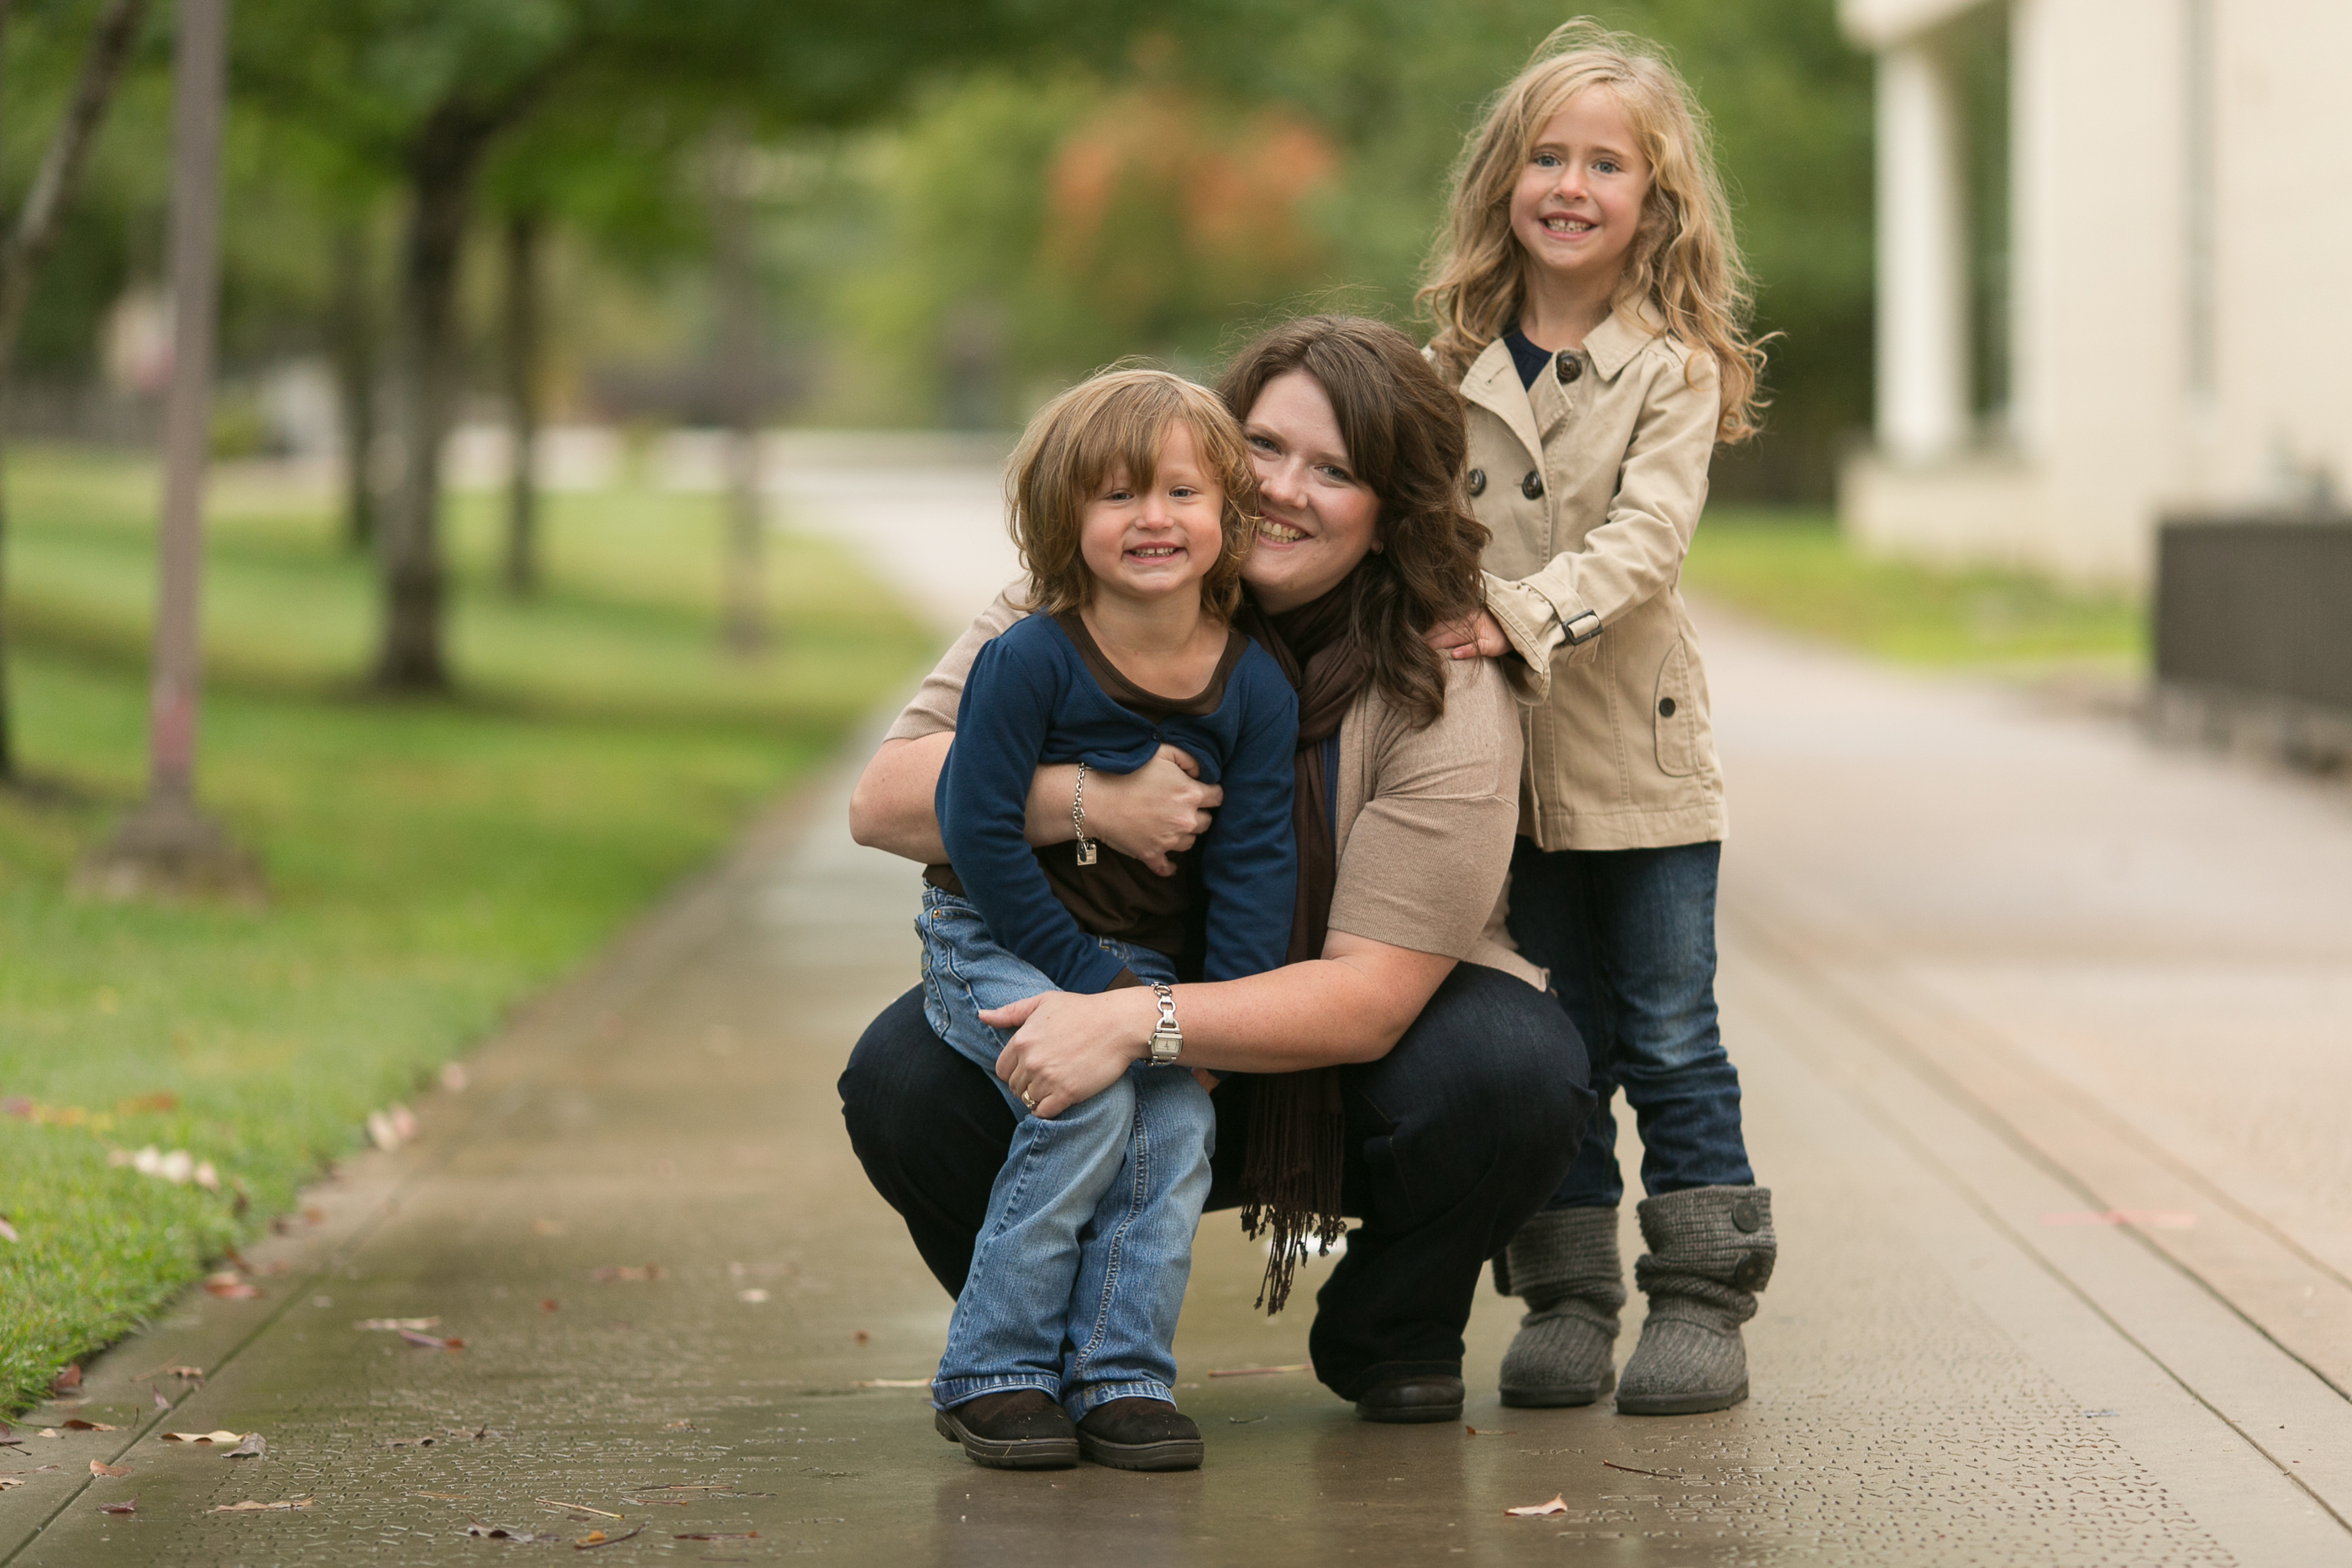 How You Can Bless a Single Mom and Her Children